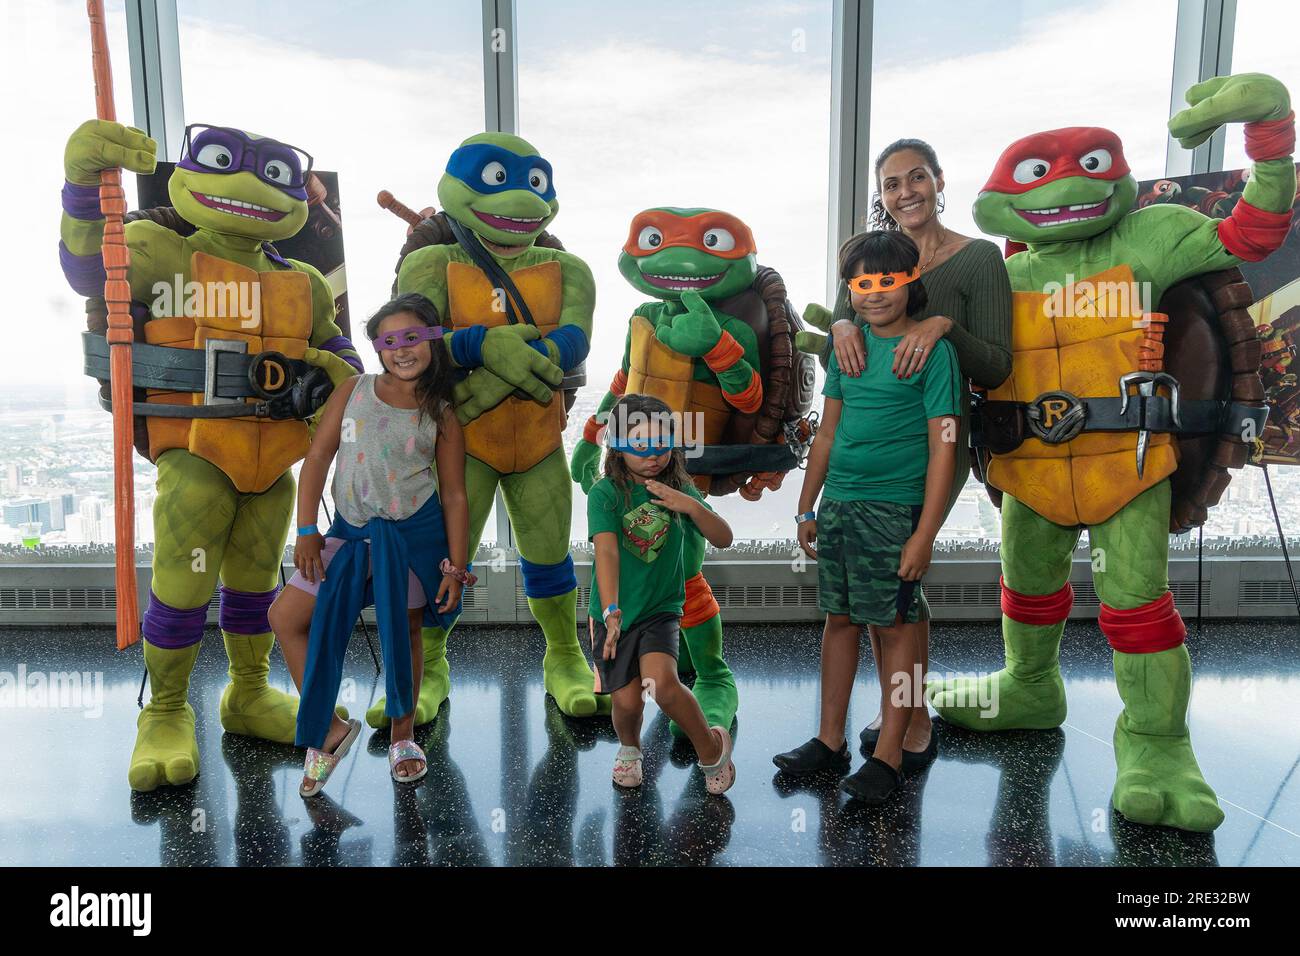 https://c8.alamy.com/comp/2RE32BW/new-york-new-york-usa-24th-july-2023-teenage-mutant-ninja-turtles-characters-visit-one-world-observatory-in-new-york-and-pose-with-visitors-in-anticipation-of-release-of-teenage-mutant-ninja-turtles-mutant-mayhem-blockbuster-movie-is-scheduled-for-release-on-august-2-2023-credit-image-lev-radinpacific-press-via-zuma-press-wire-editorial-usage-only!-not-for-commercial-usage!-credit-zuma-press-incalamy-live-news-2RE32BW.jpg